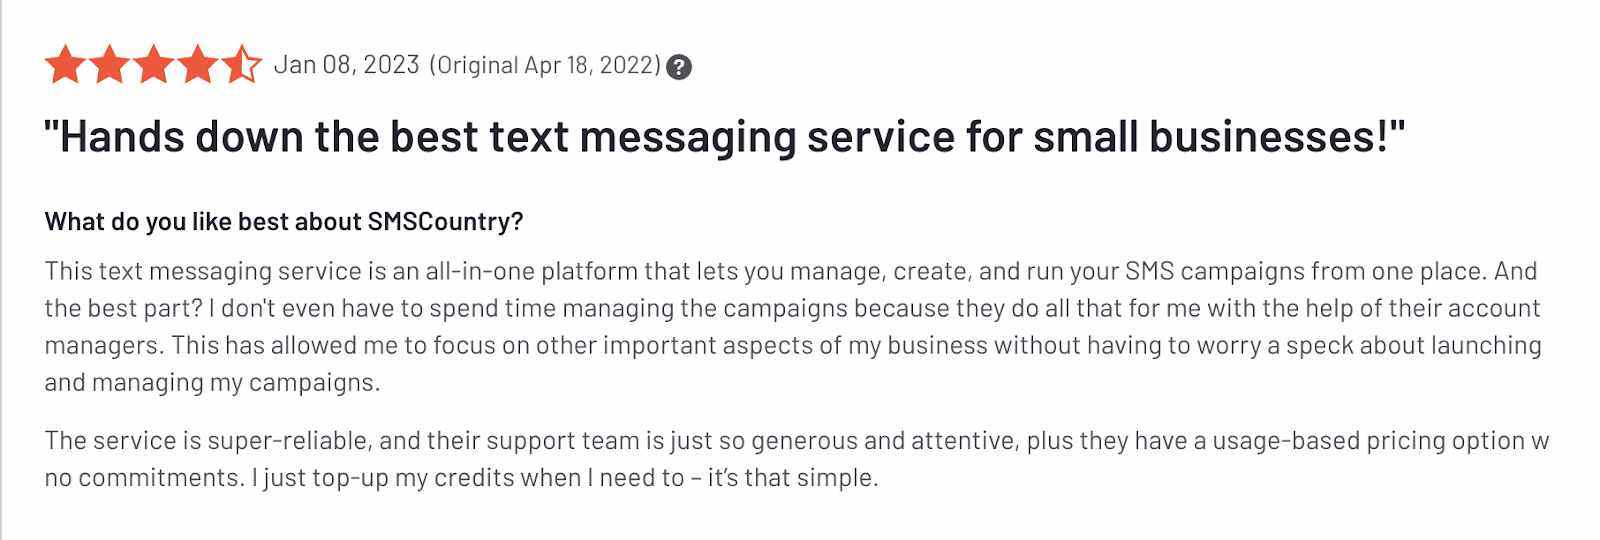 Twilio vs smscountry | Recent testimonial from a happy SMSCountry customer about reliable service